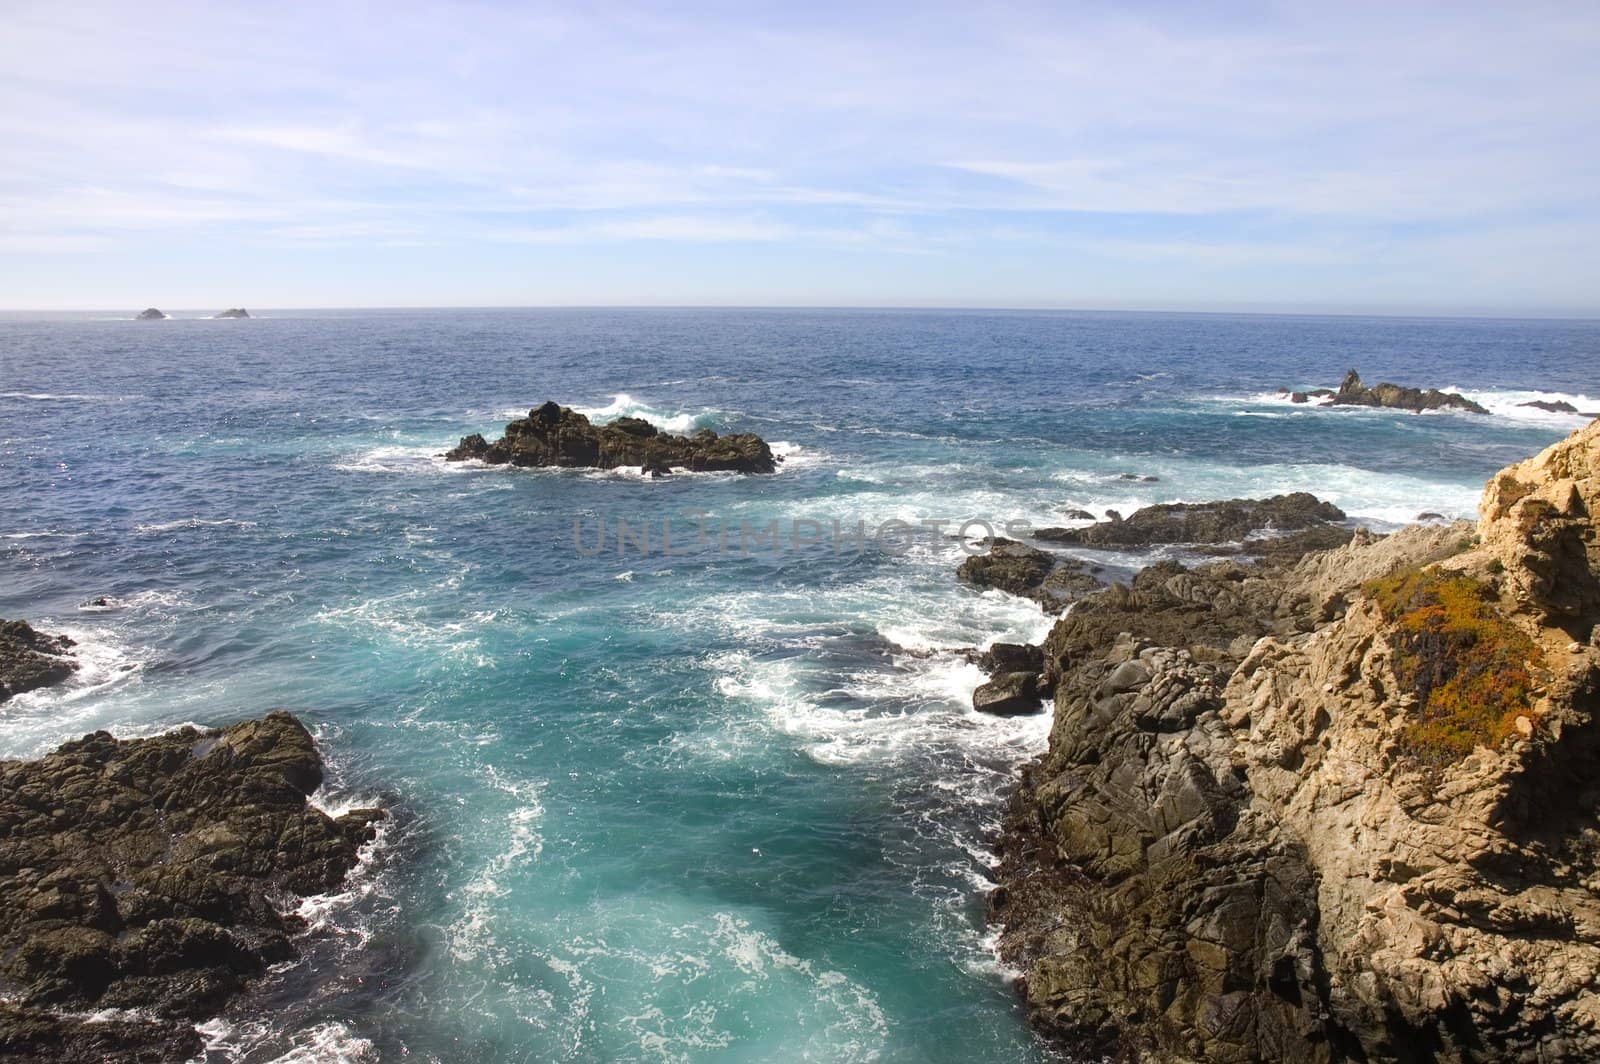 View of the cliffs and the Pacific Ocean from the the headlands south of Monterey in California